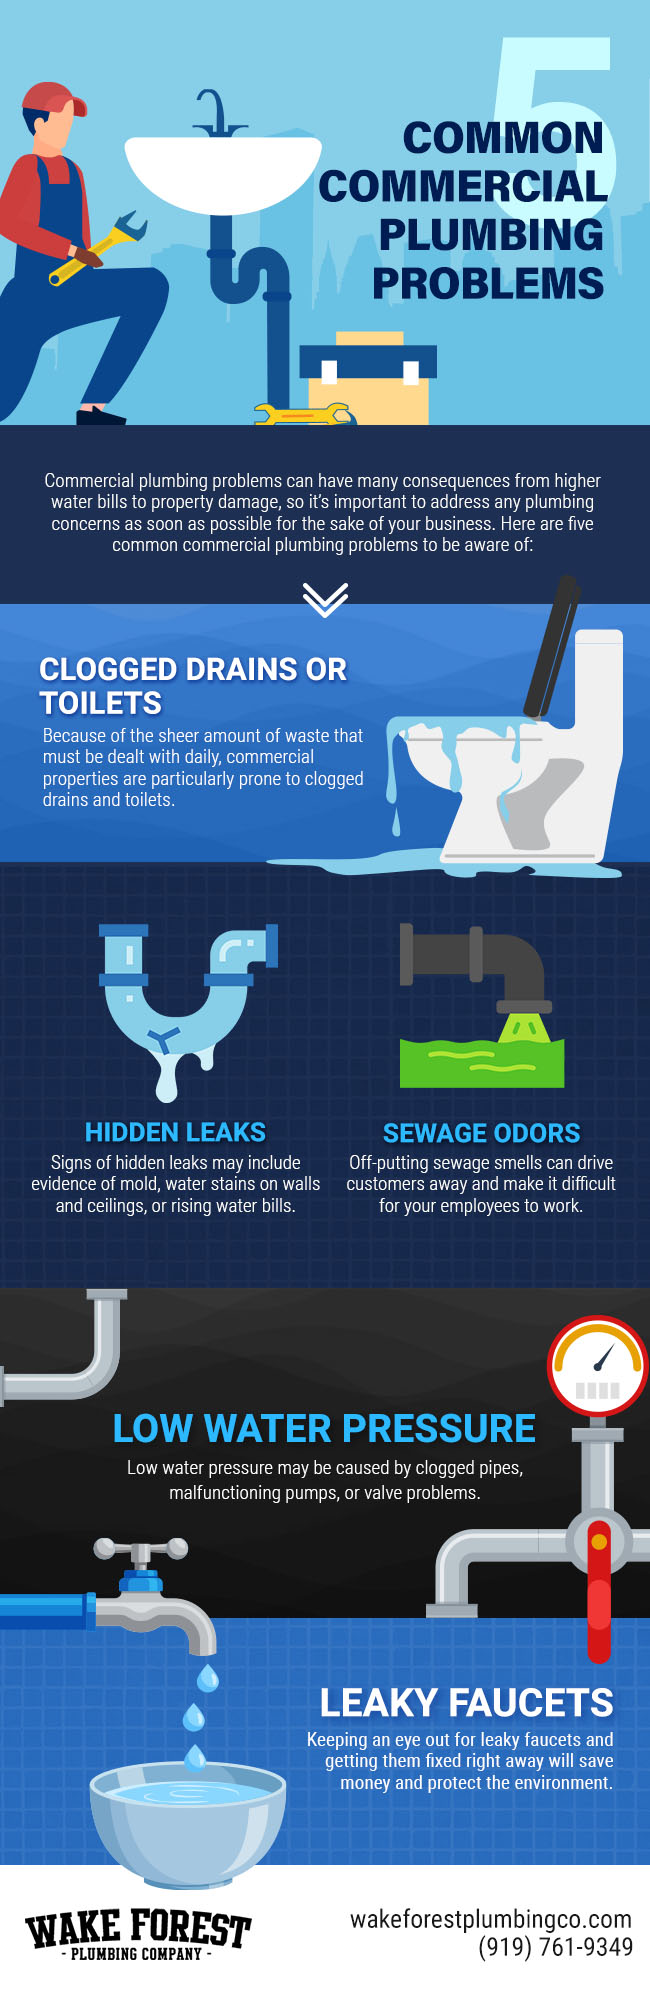 5 Common Commercial Plumbing Problems [infographic]